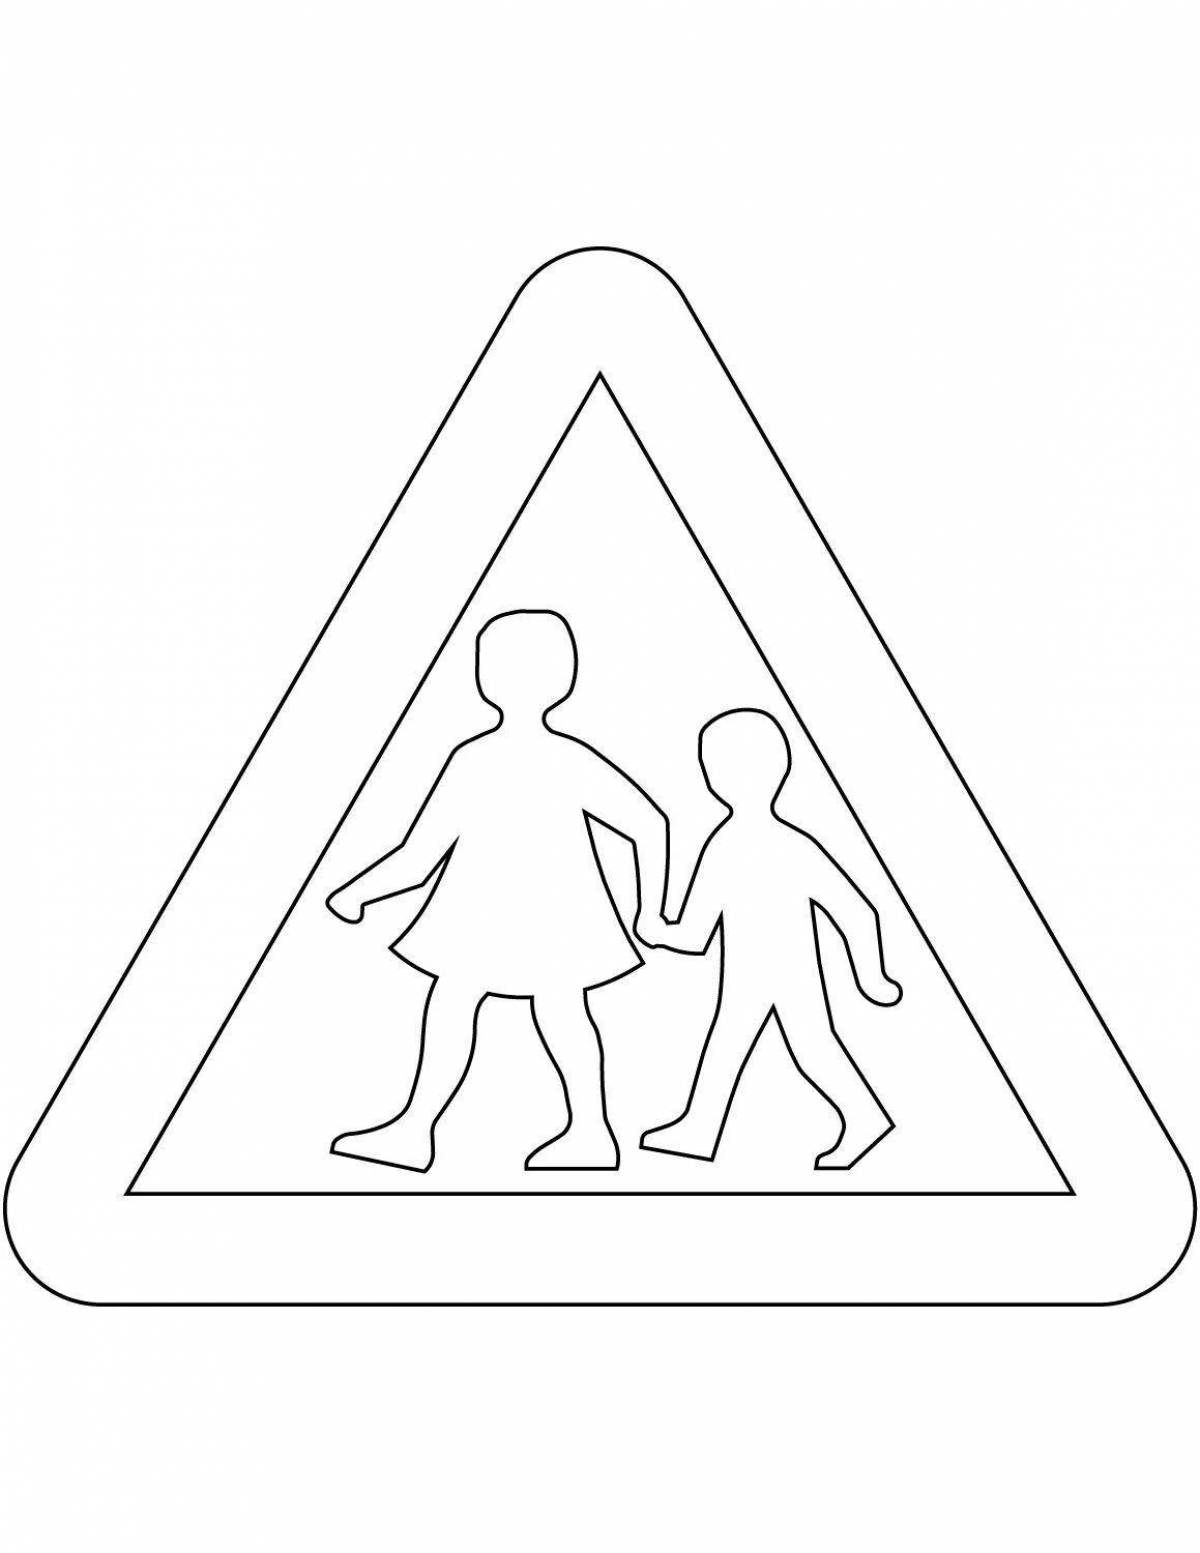 Spatter road sign coloring page for preschoolers